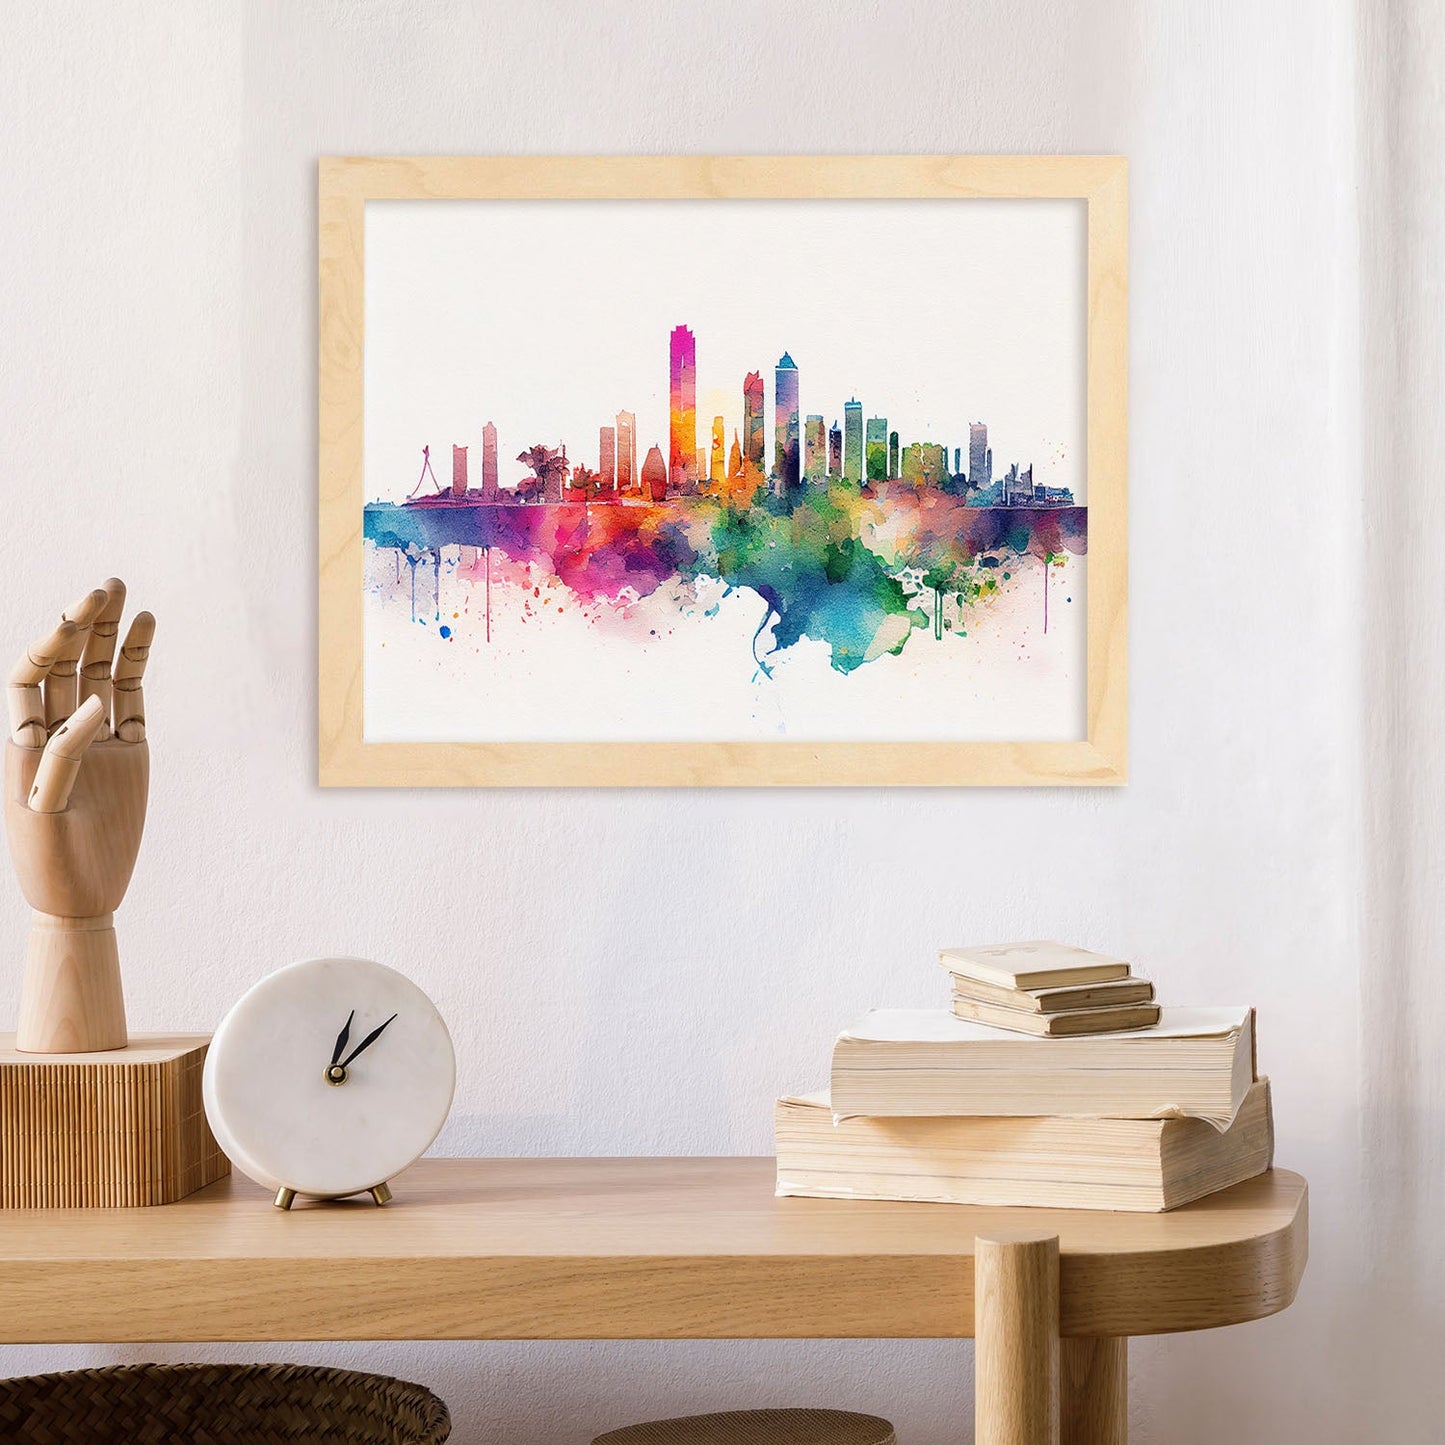 Nacnic watercolor of a skyline of the city of Tel Aviv_1. Aesthetic Wall Art Prints for Bedroom or Living Room Design.